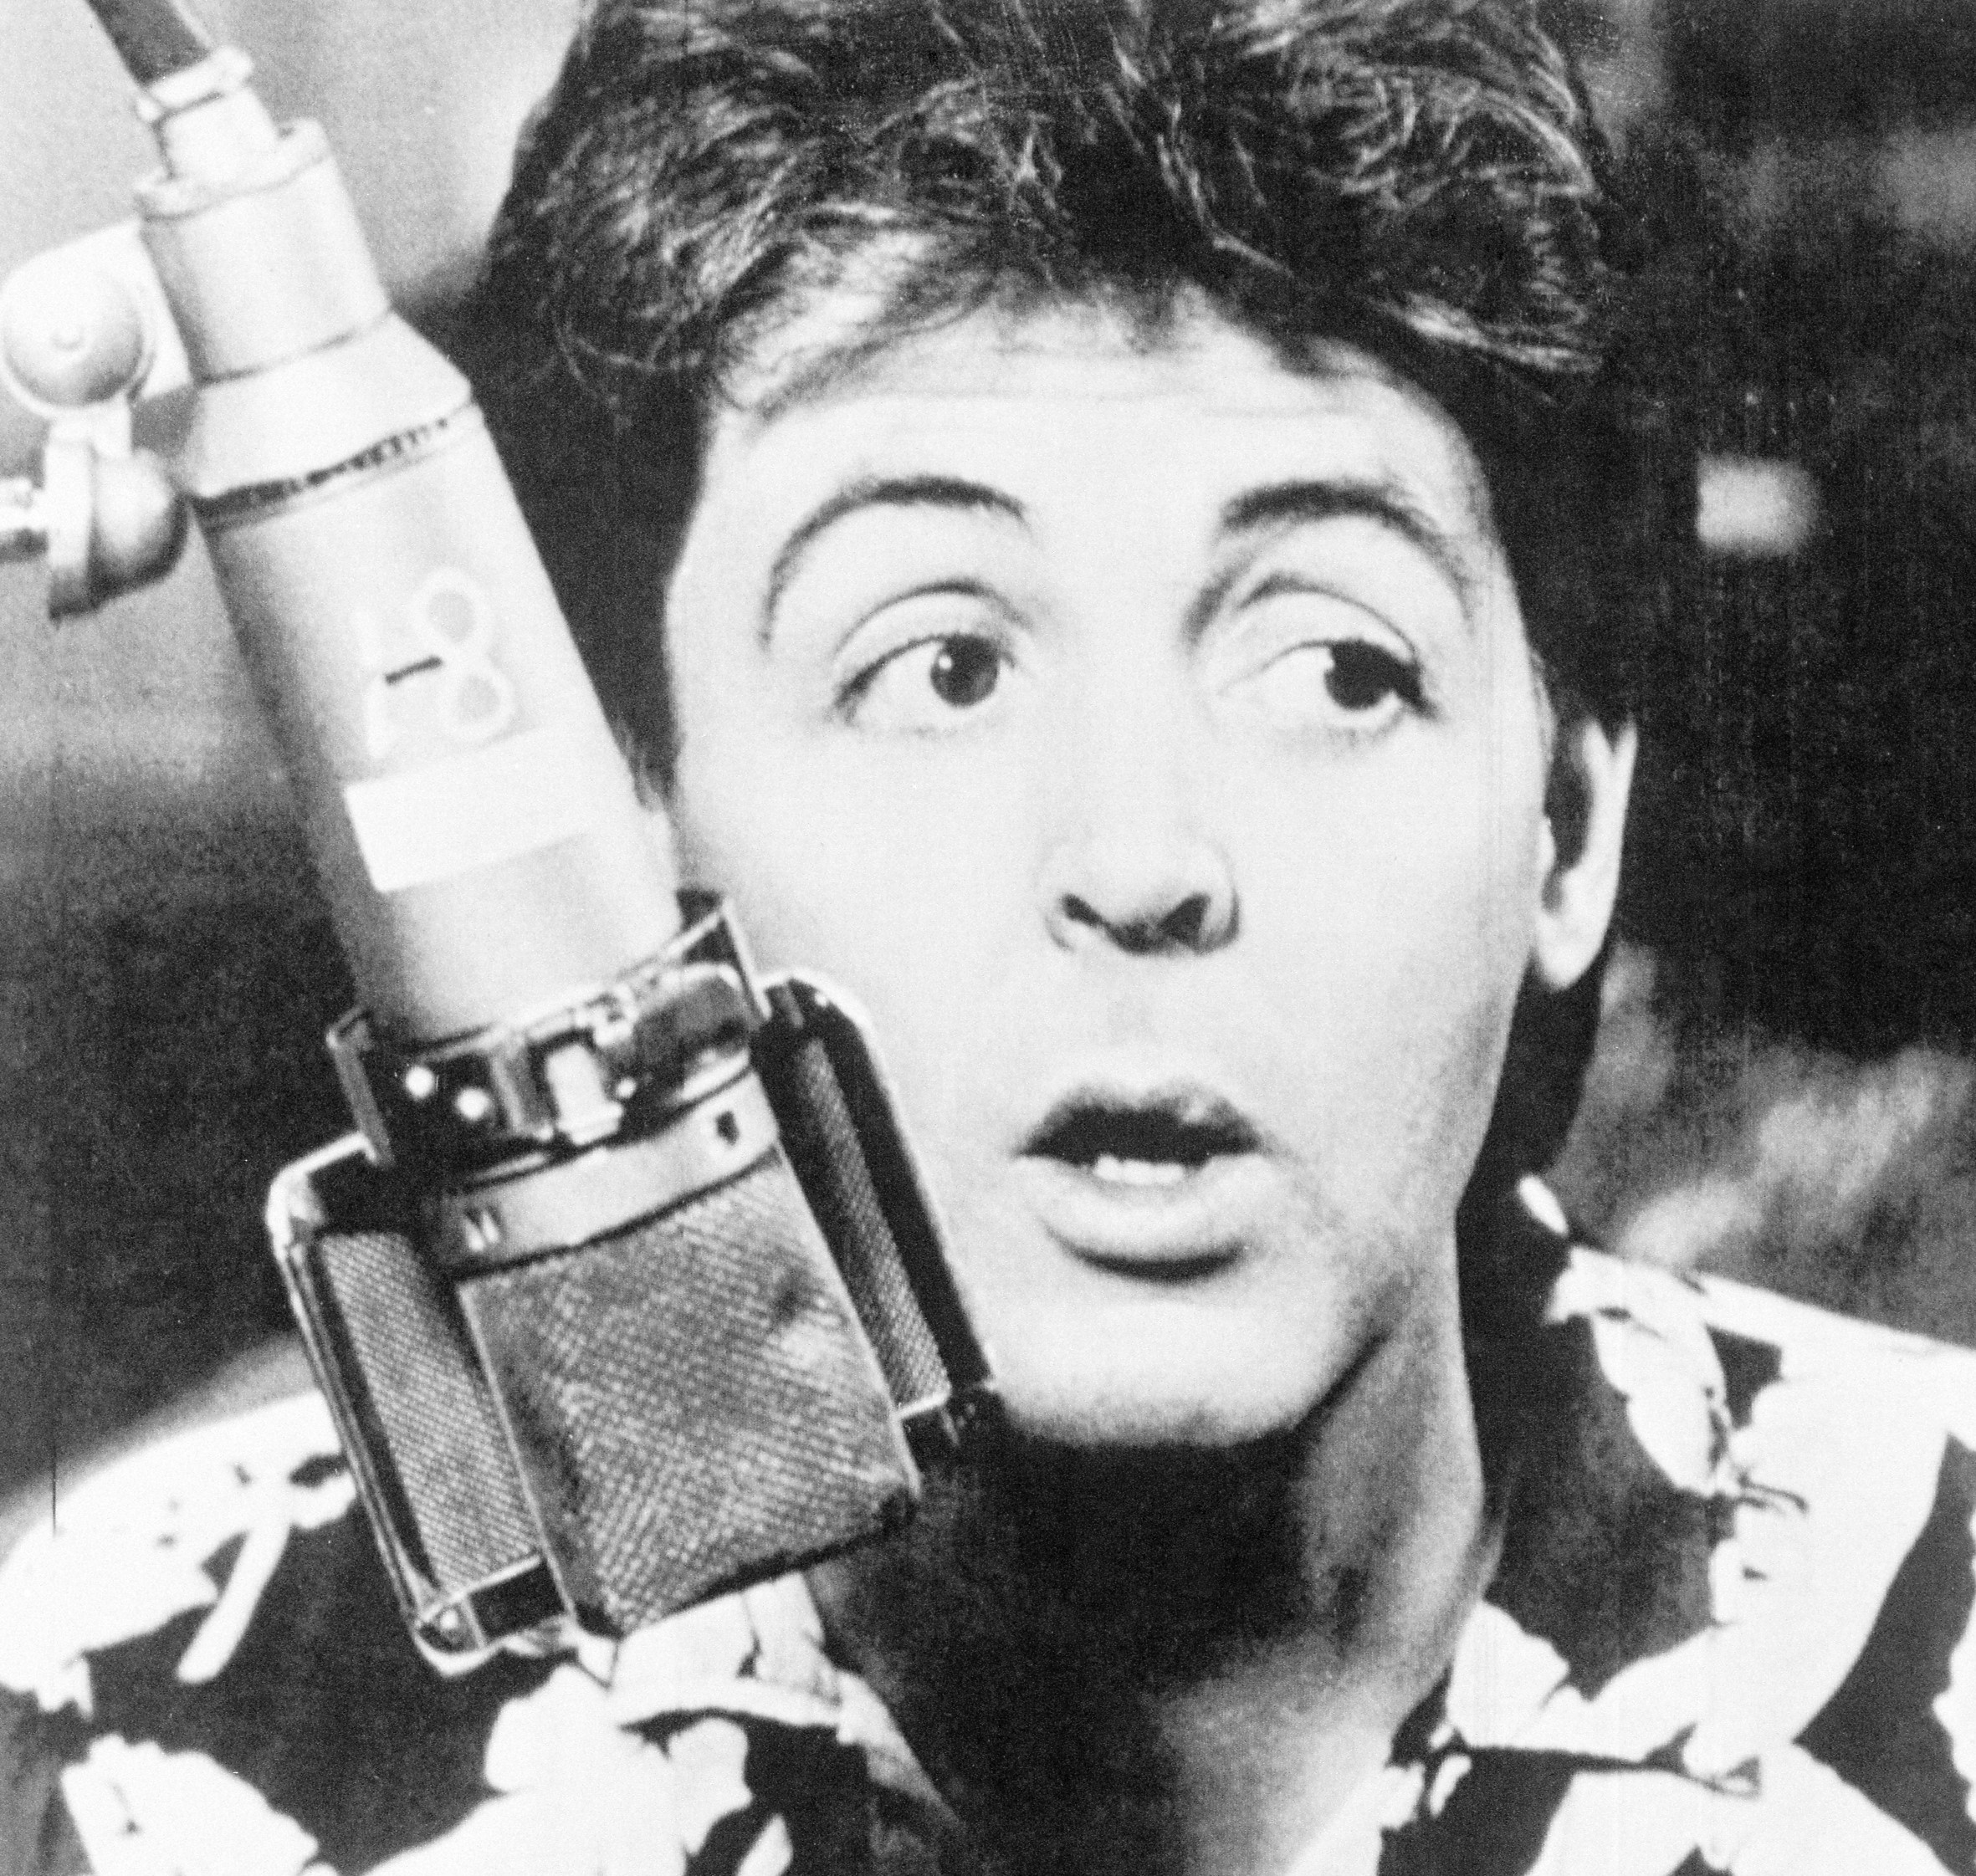 Paul McCartney with a microphone during his "Wonderful Christmastime" era